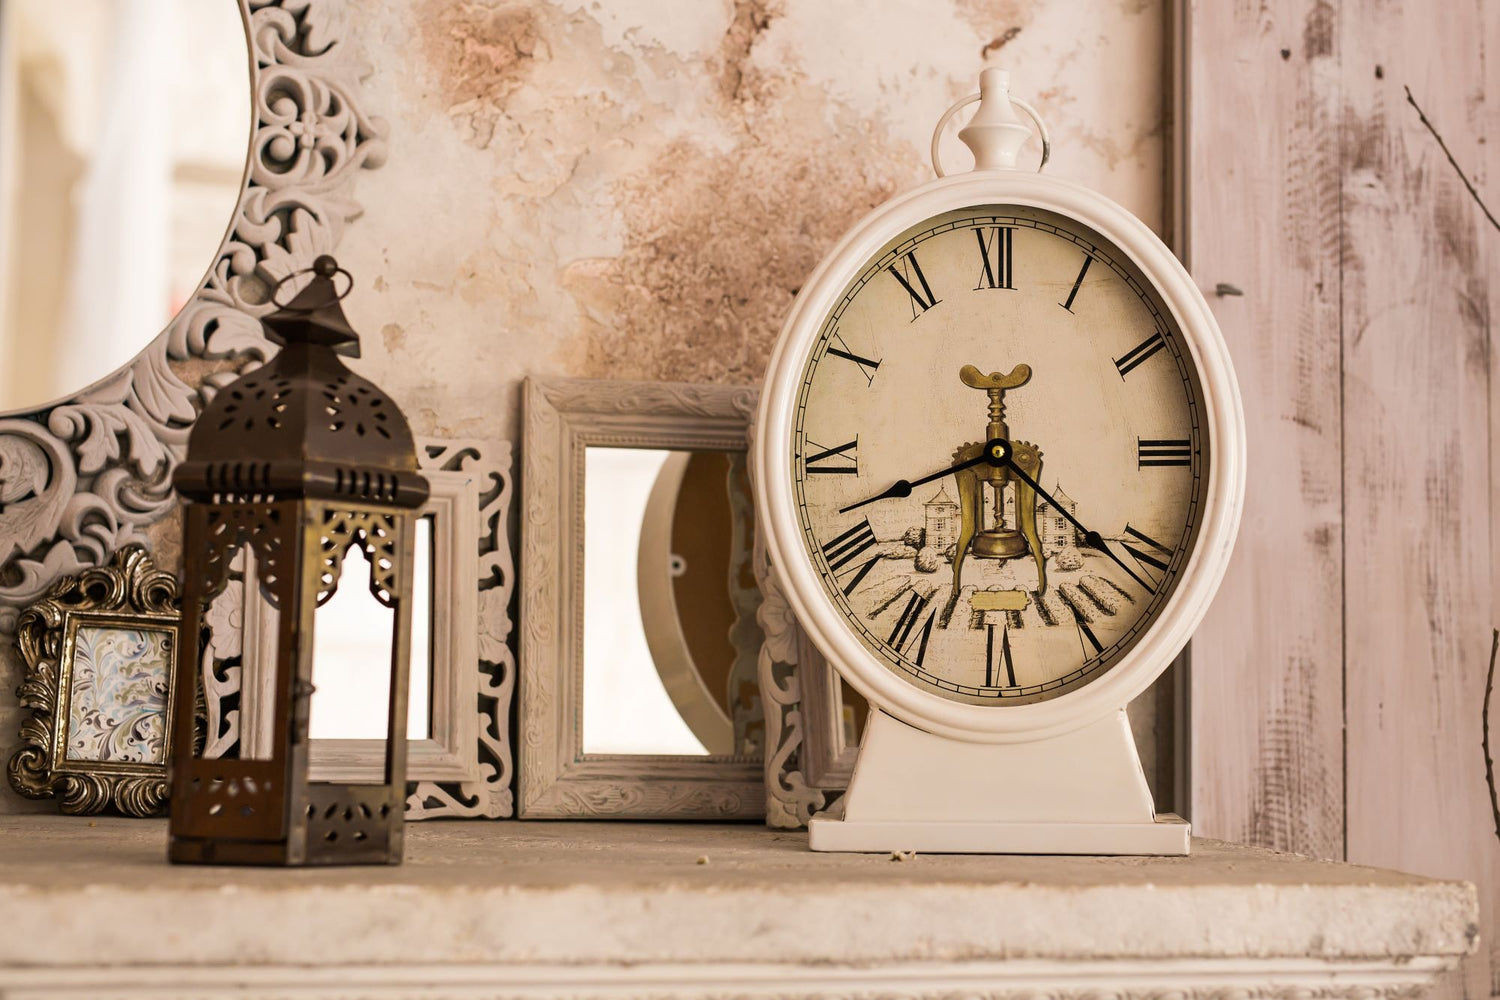 a vintage scene with an old clock, mirror, wooden-tapestry and old photo frames